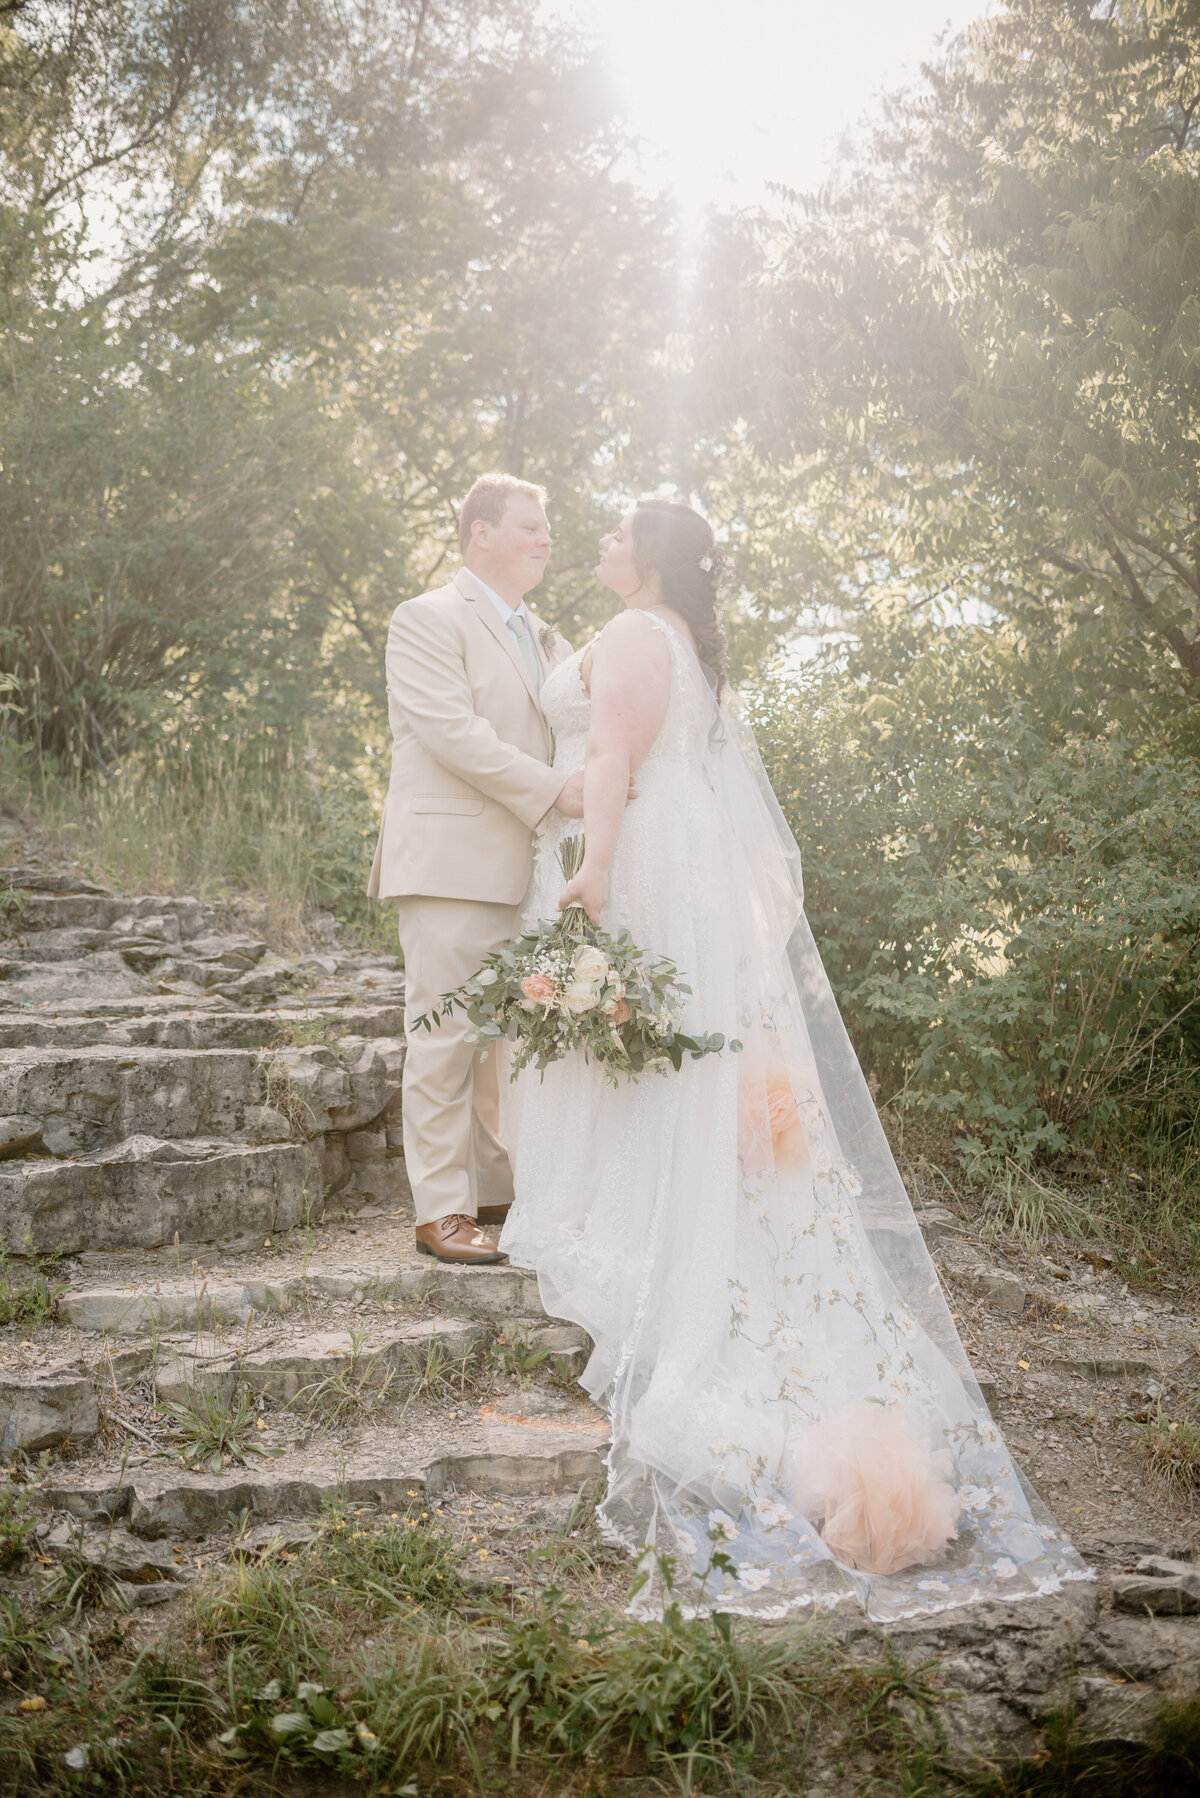 a sunlit moment with the bride and groom